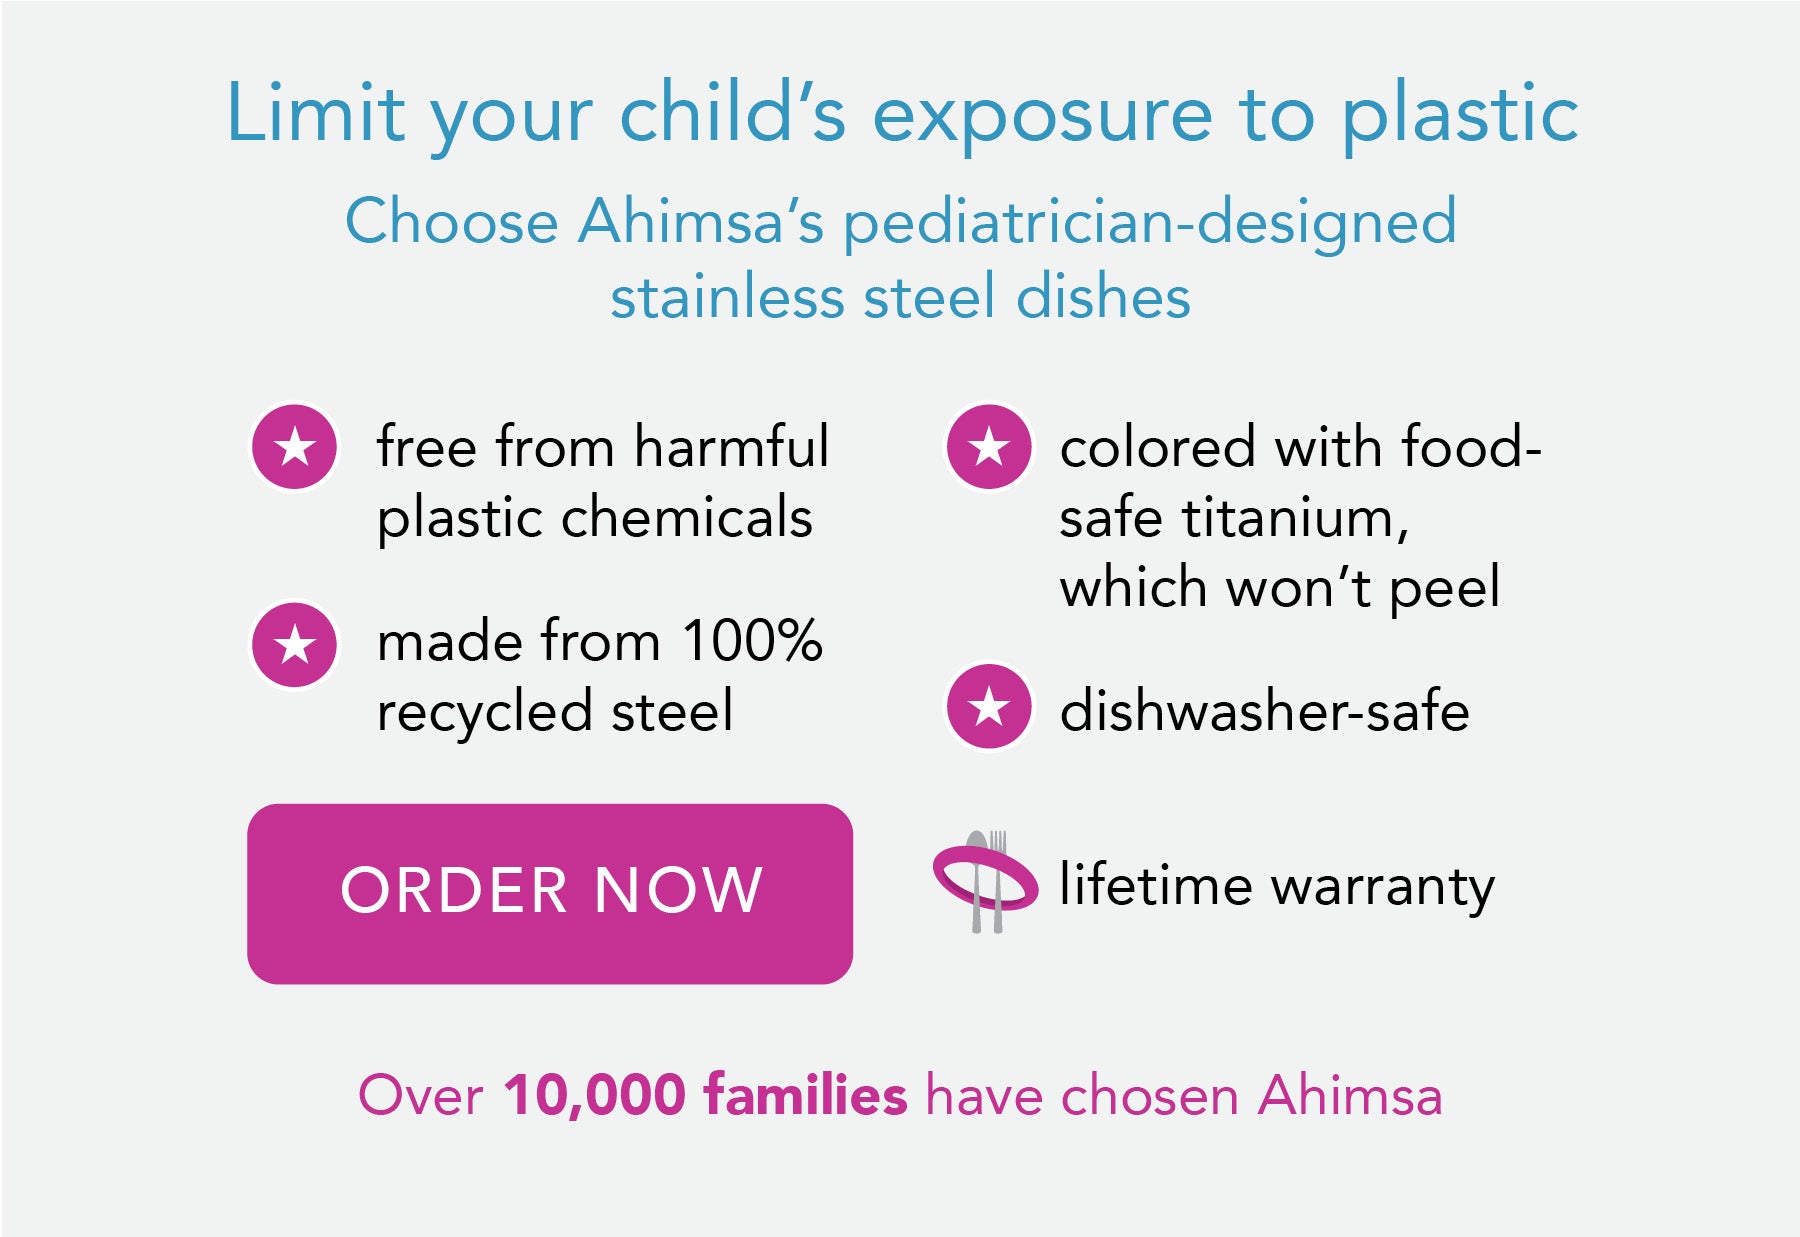 Designed by a mom on a mission safe, sustainable and smart stainless steel dishes. Free of harmful chemicals, made from 100% recycled steel, colored with food-safe titanium which won't peel and dishewasher safe. 8990 families ave gone plastic-free at meal